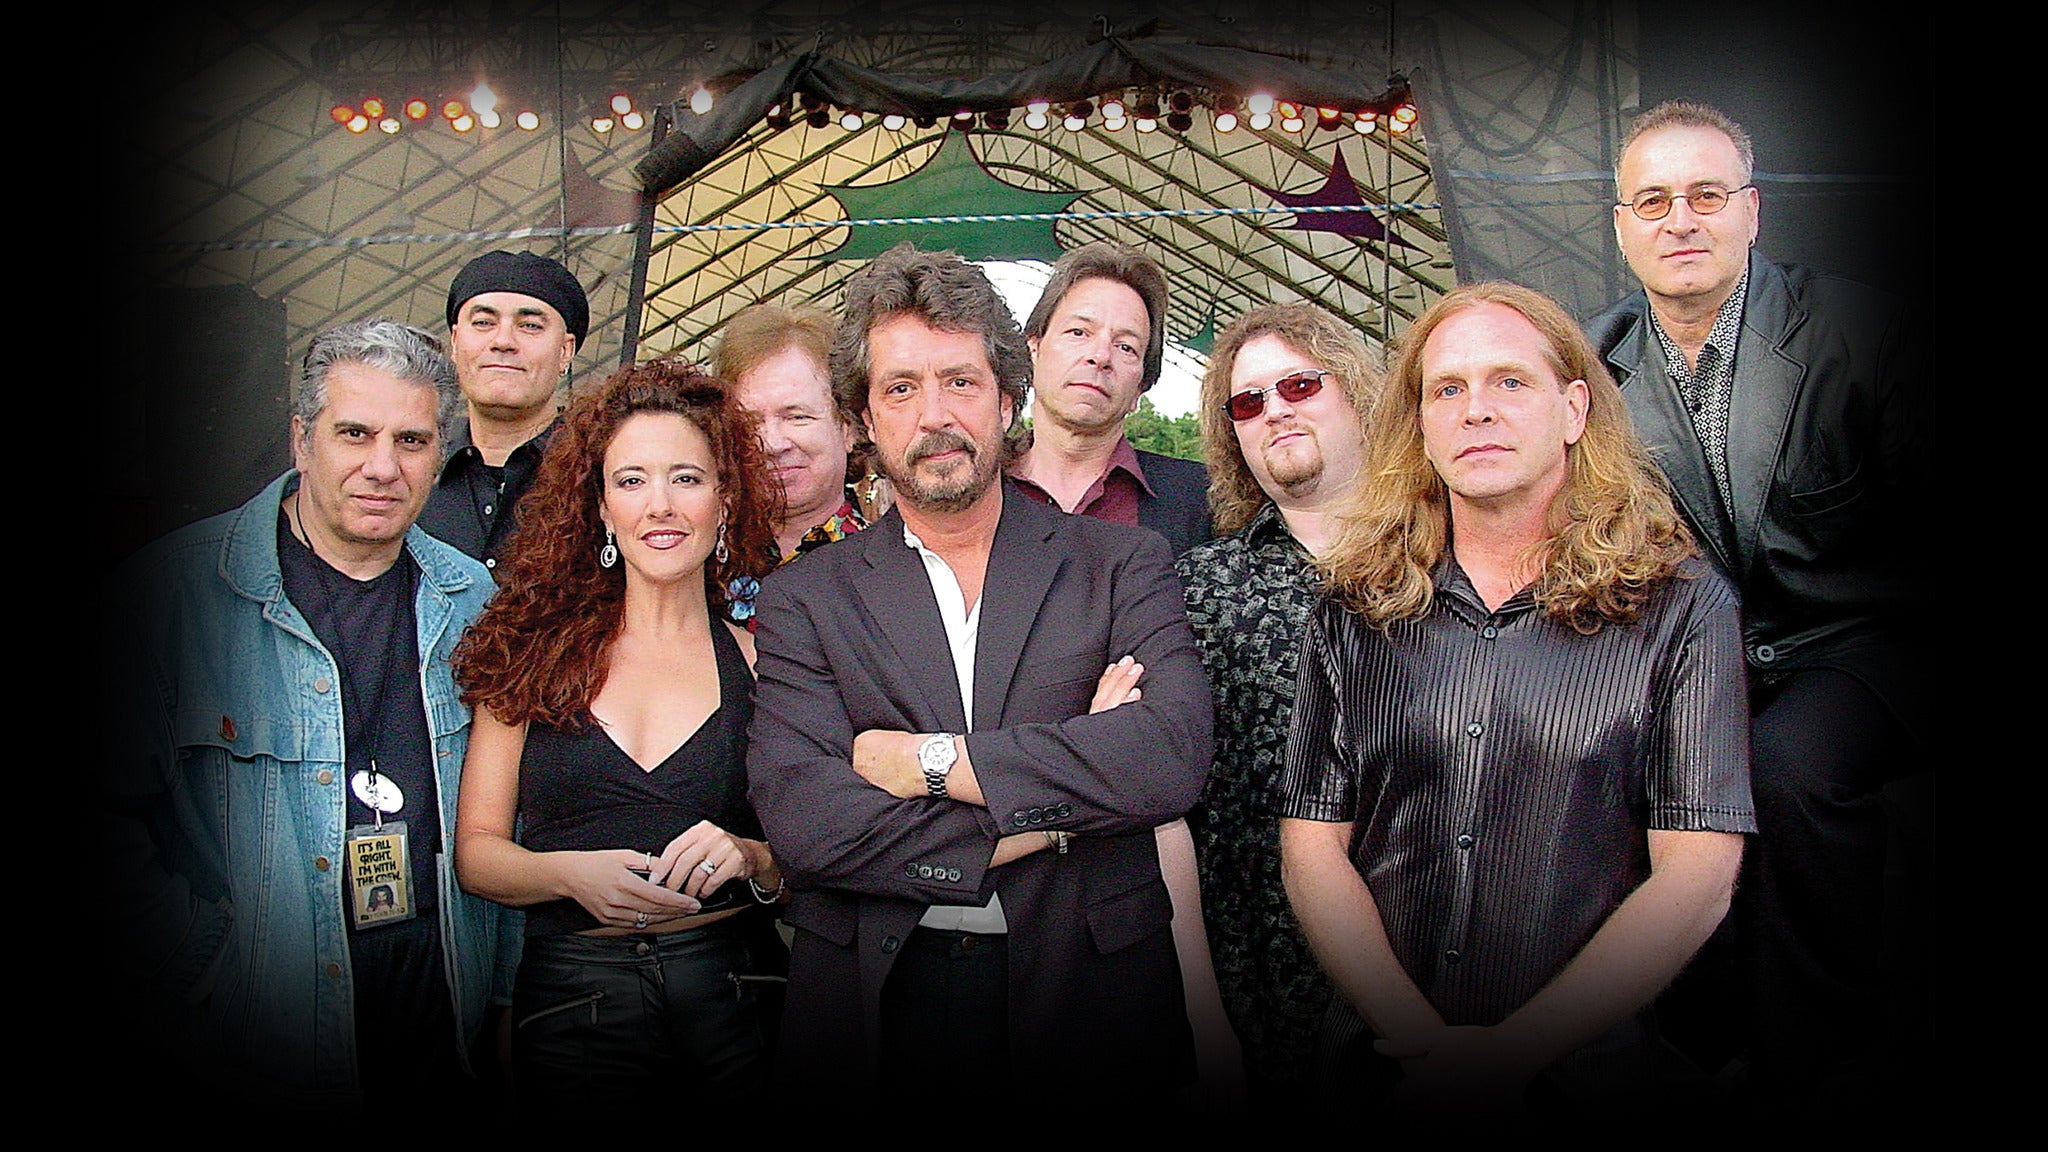 Michael Stanley and the Resonators in Canton promo photo for VIP Meet and Greet Package presale offer code